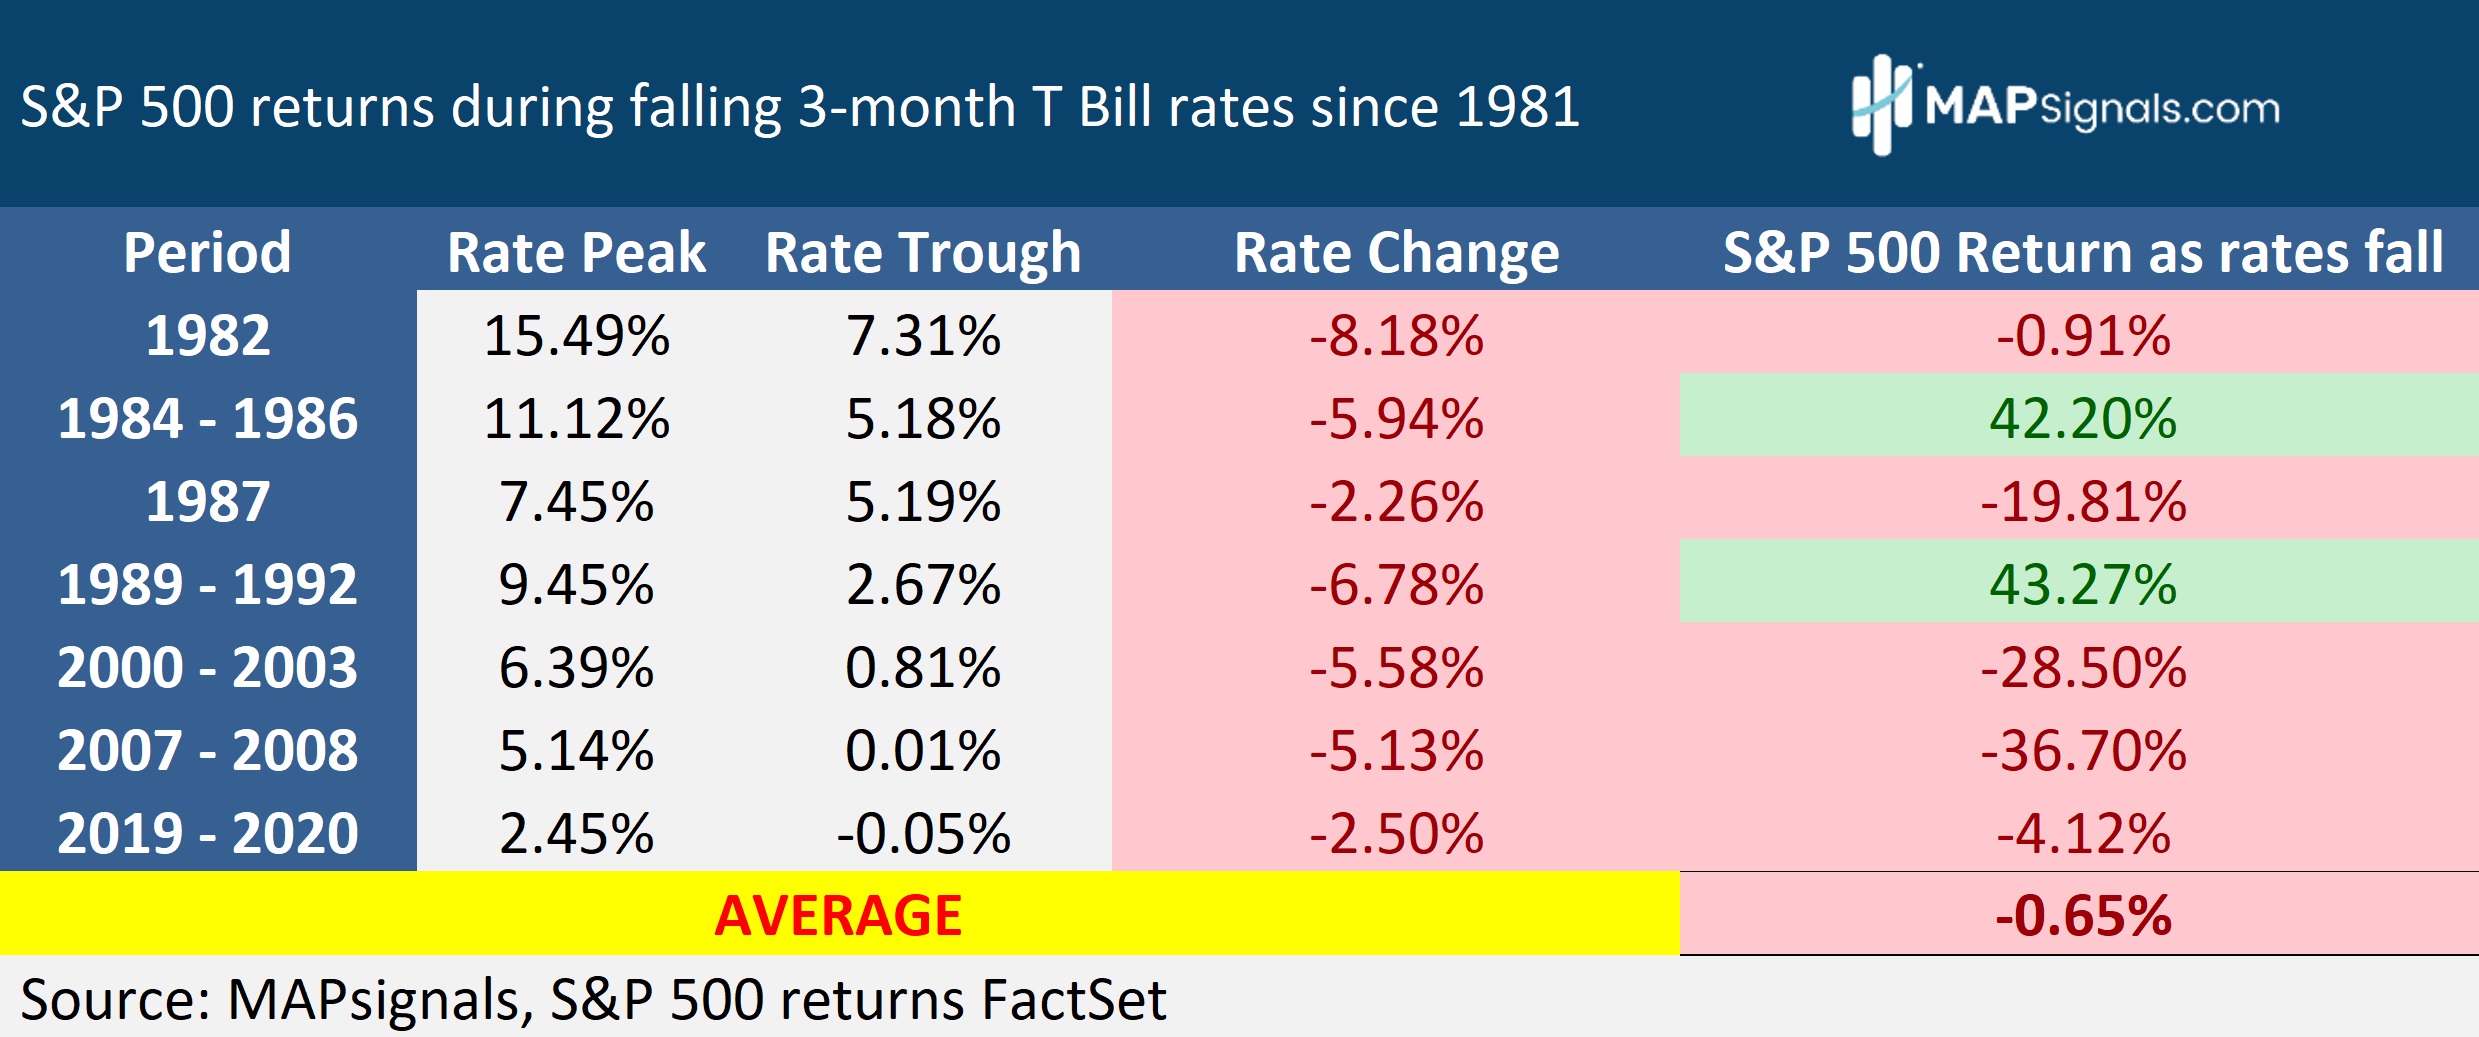 S&P 500 returns during falling 3-month T Bill rates since 1981 | MAPsignals